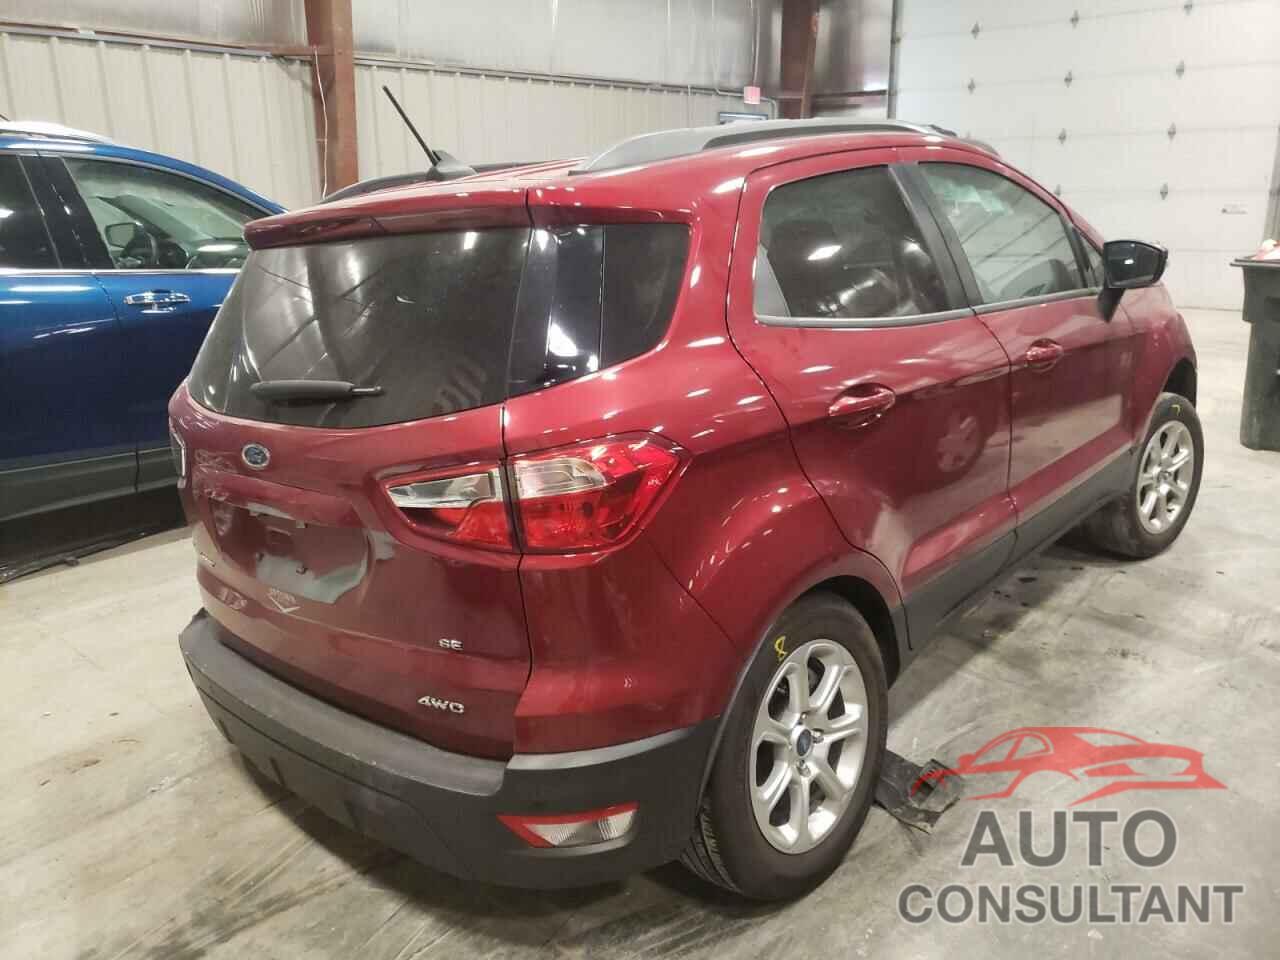 FORD ALL OTHER 2019 - MAJ6S3GL7KC284935